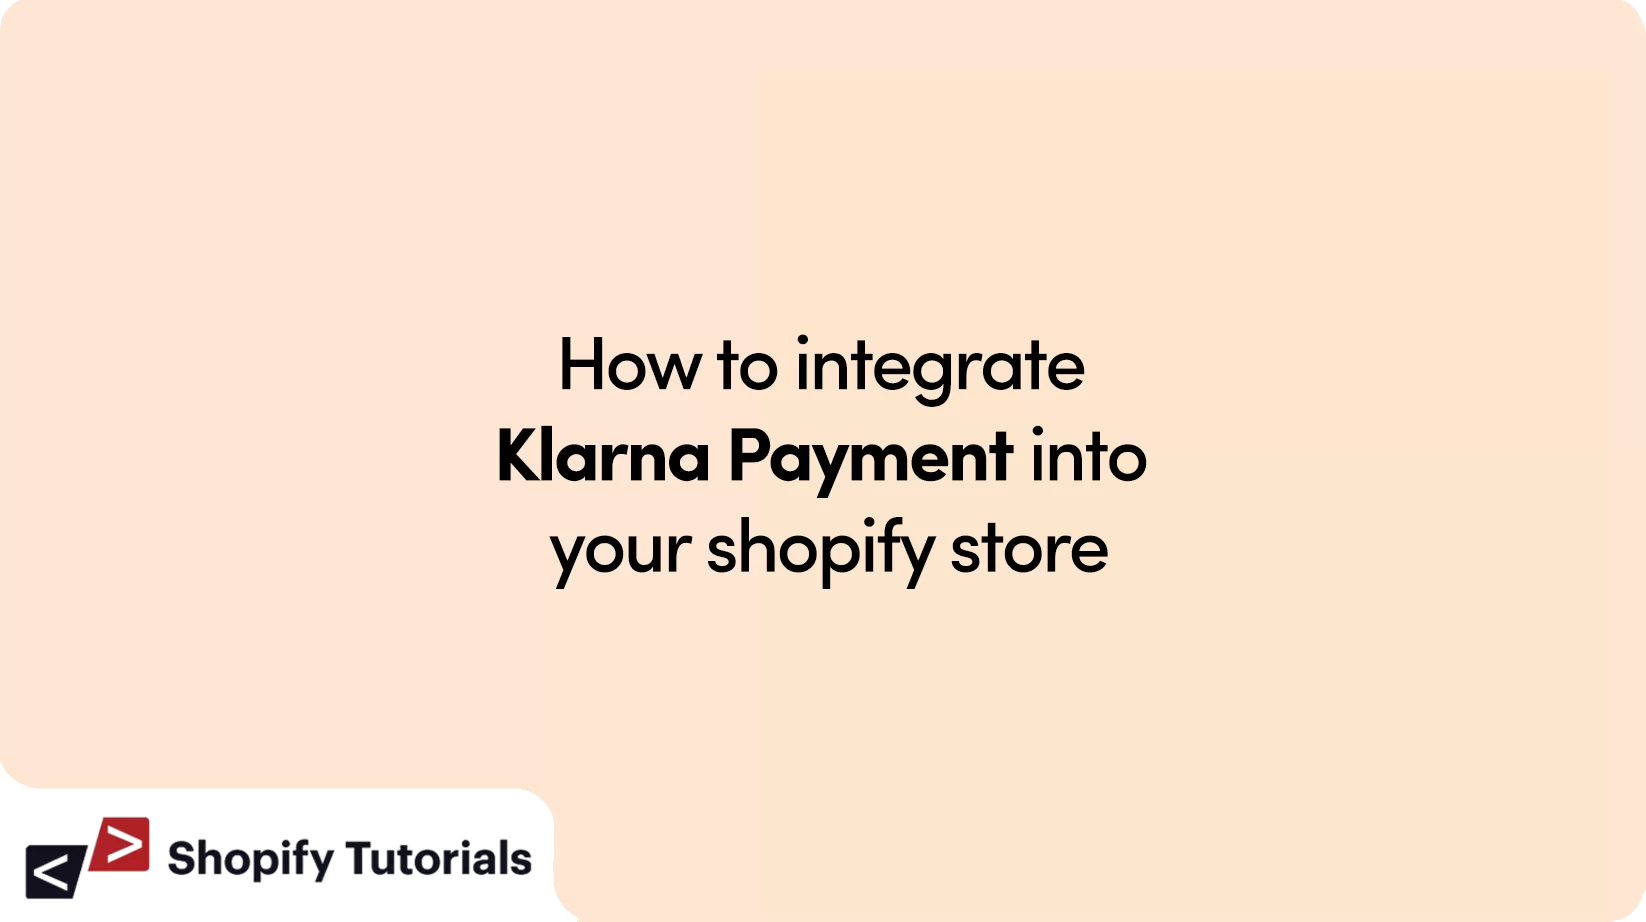 How to integrate Klarna Payment into your shopify store